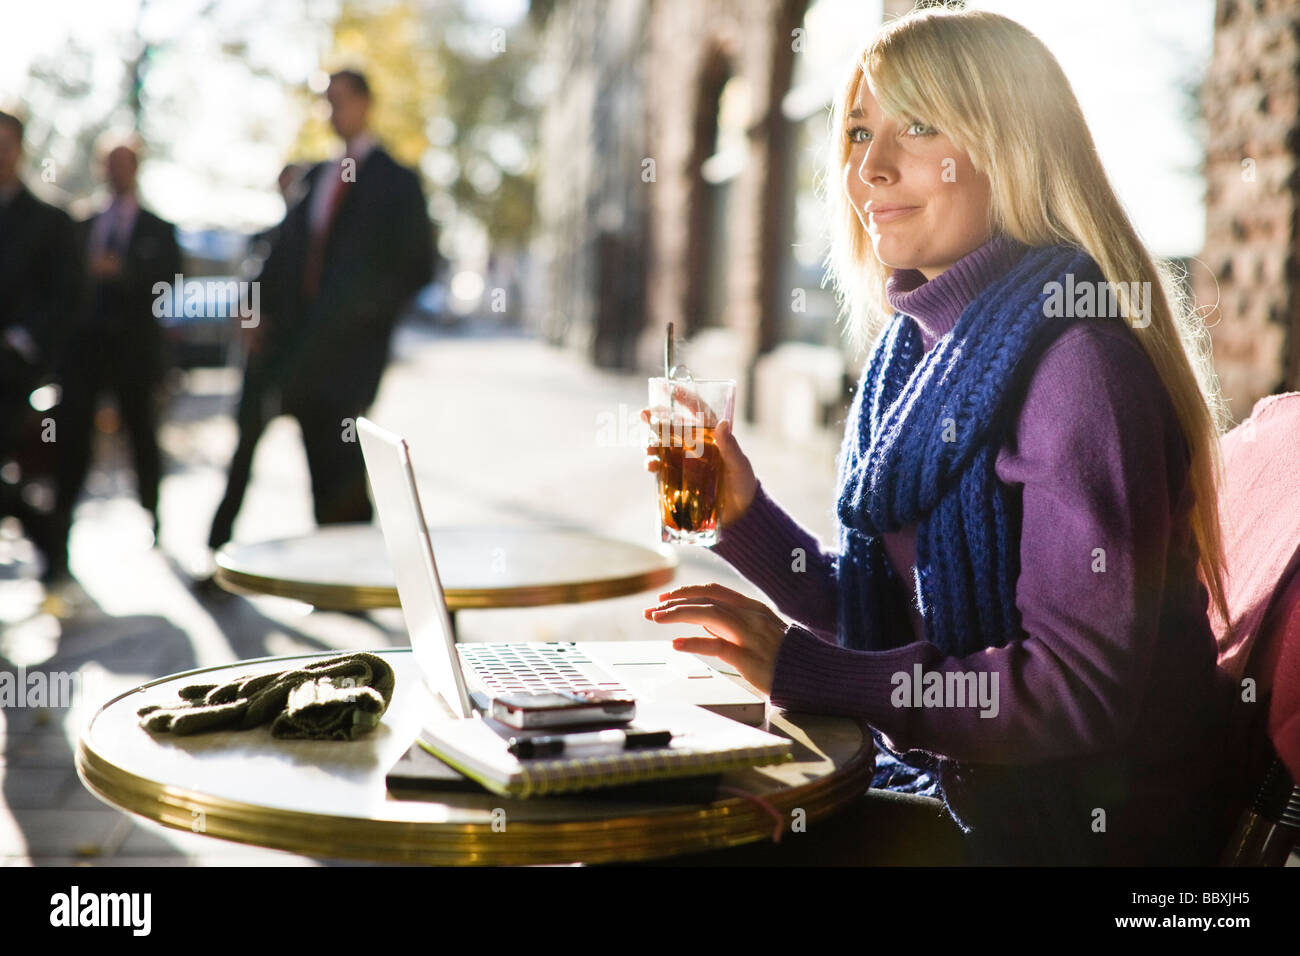 Young woman sitting in a caf using a laptop Sweden. Stock Photo